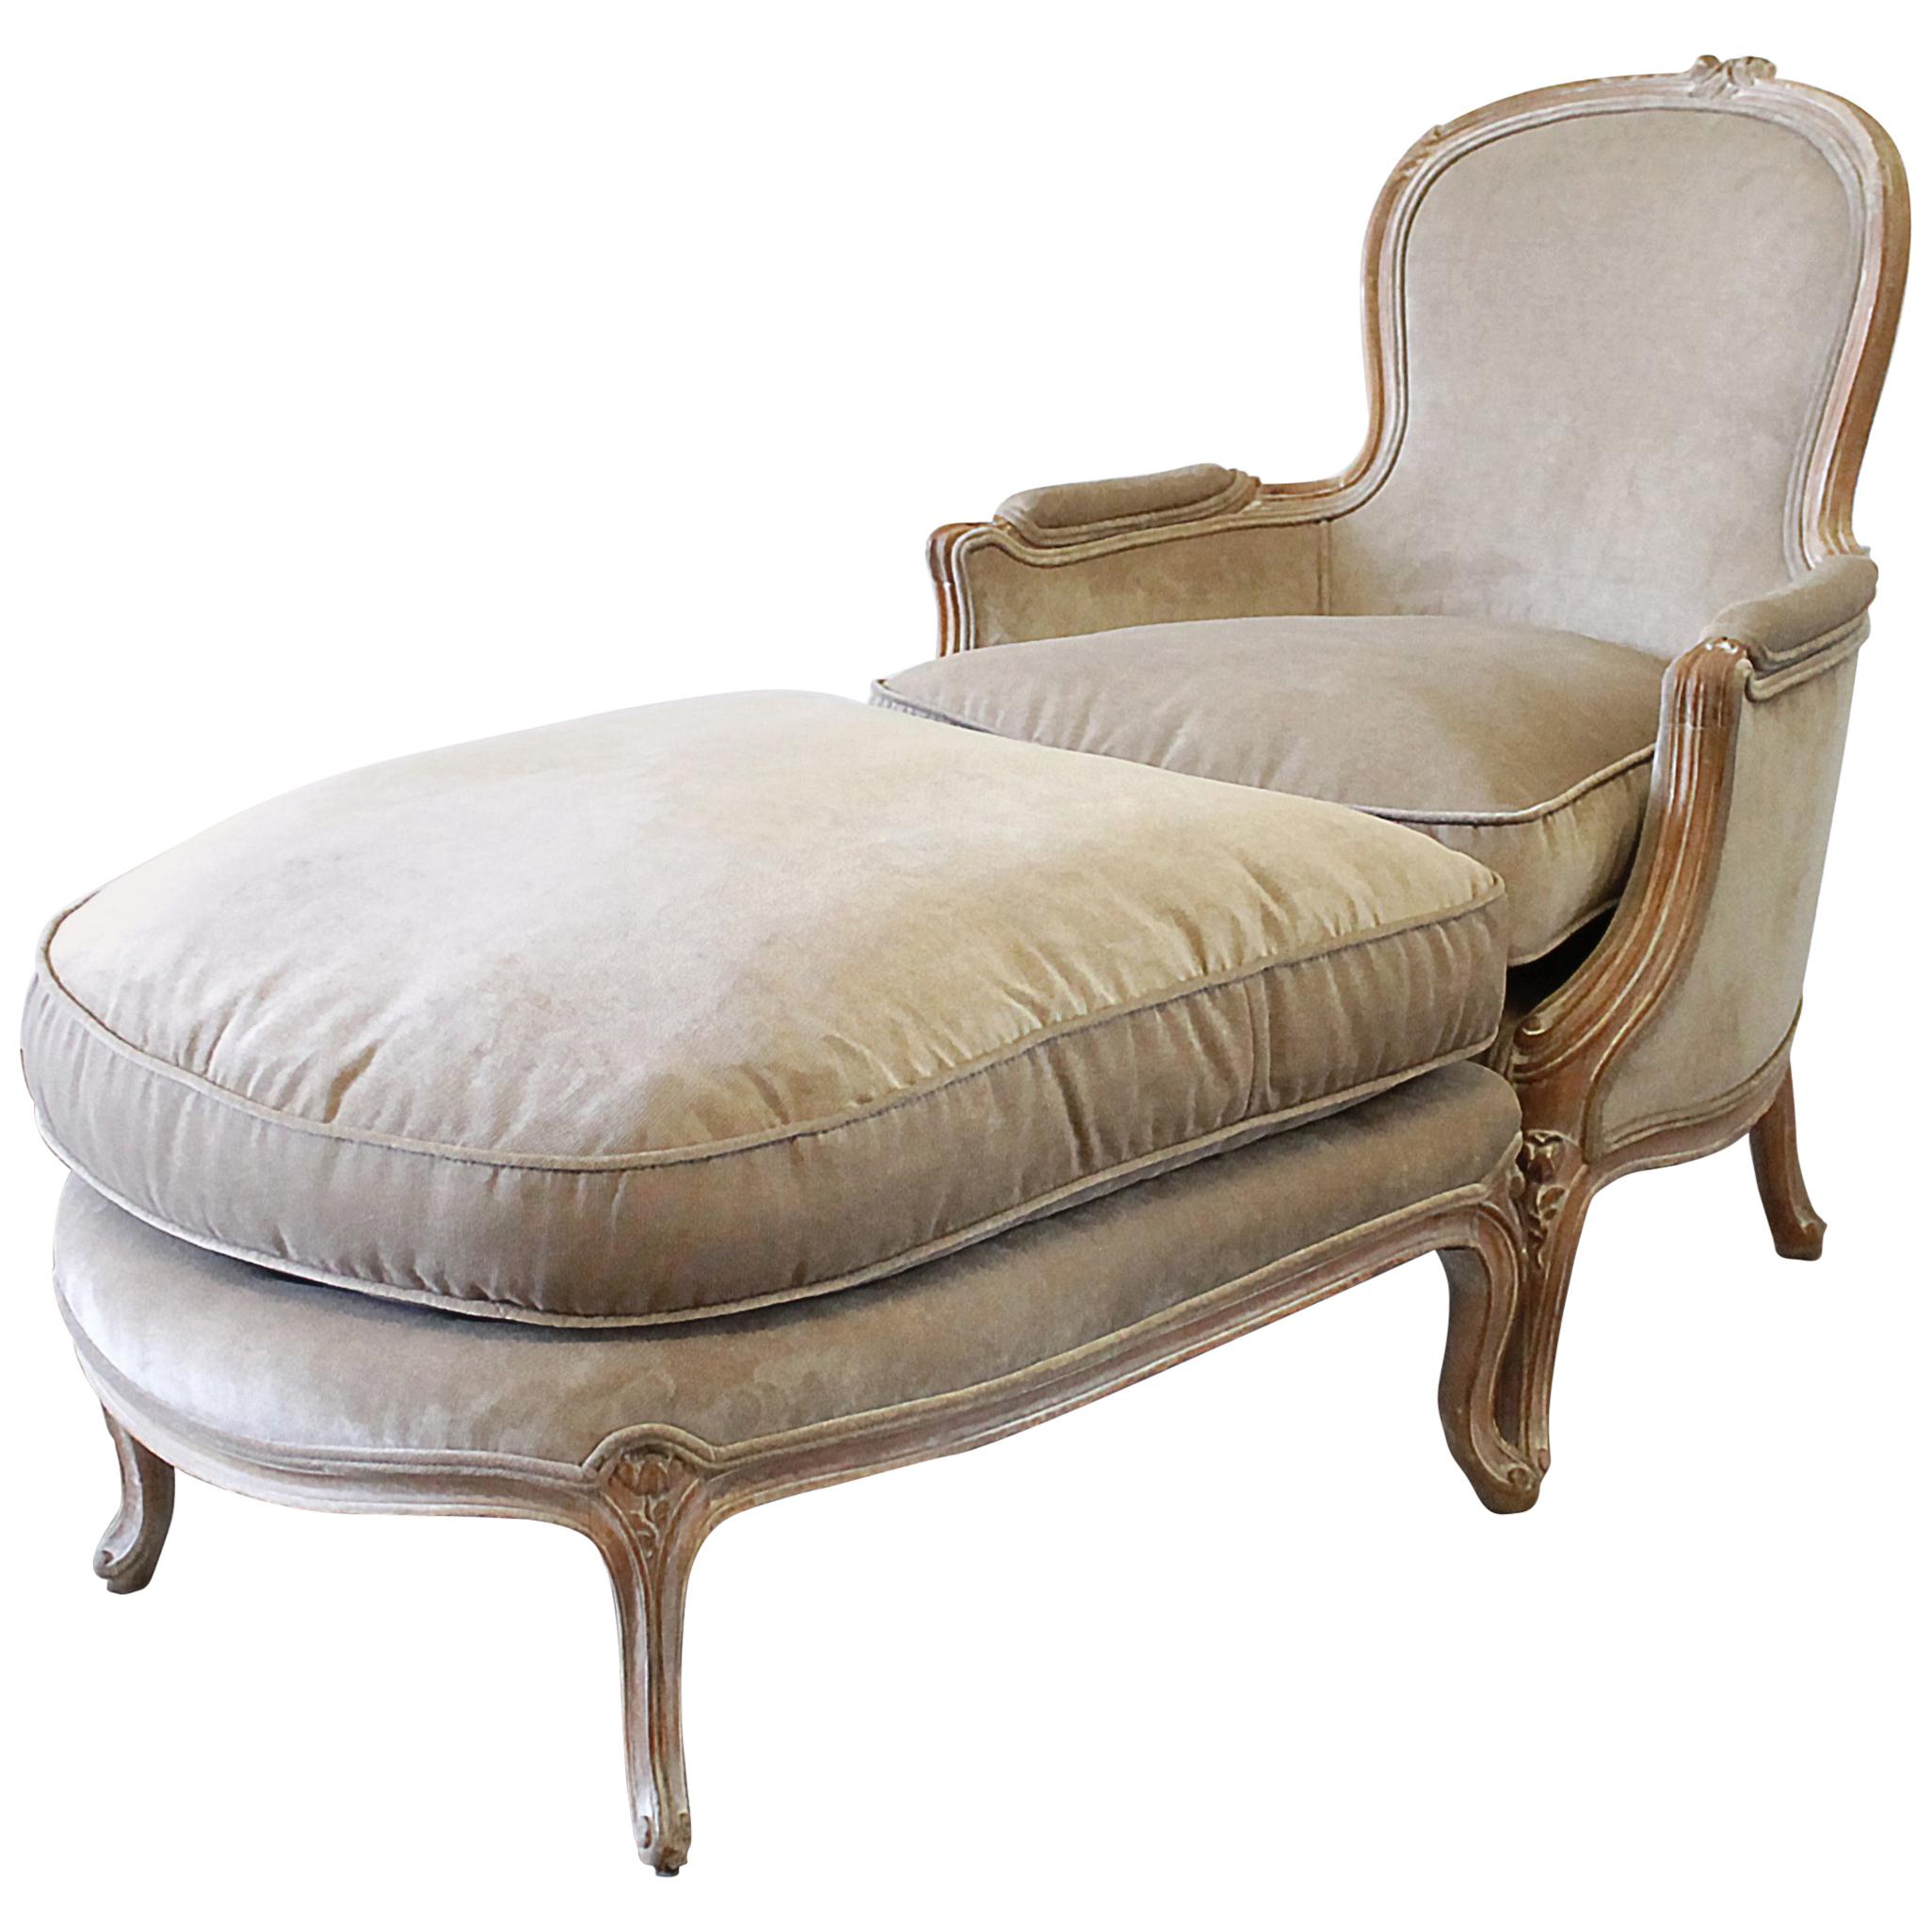 Vintage Louis XV Style Chair and Ottoman Upholstered in Velvet Fabric